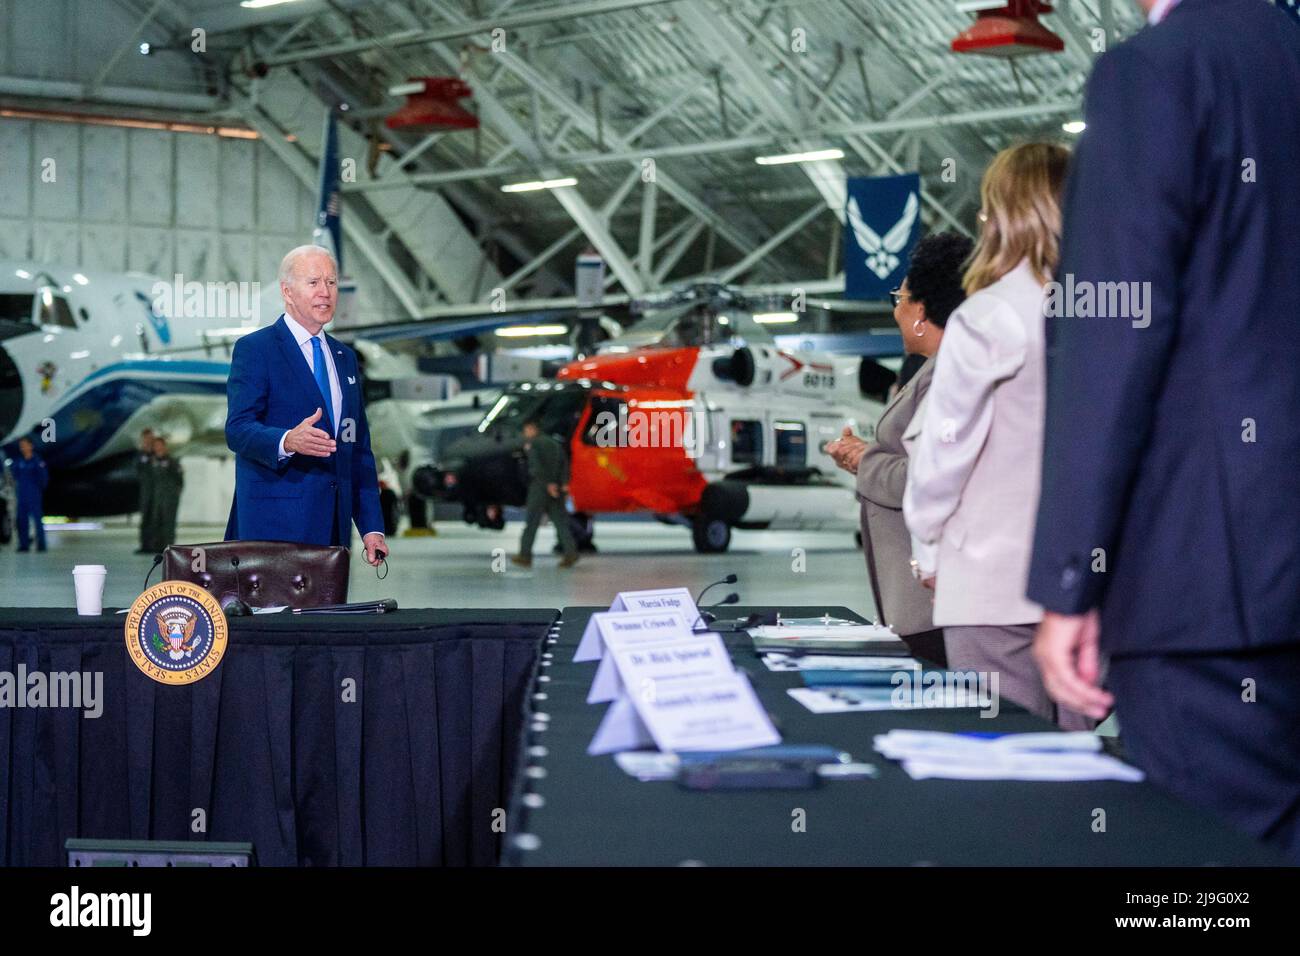 US President Joe Biden delivers remarks prior to a briefing on interagency efforts to prepare for and respond to hurricanes this season at Joint Base Andrews in Maryland, USA 18 May 2022. Credit: Shawn Thew/Pool via CNP Stock Photo